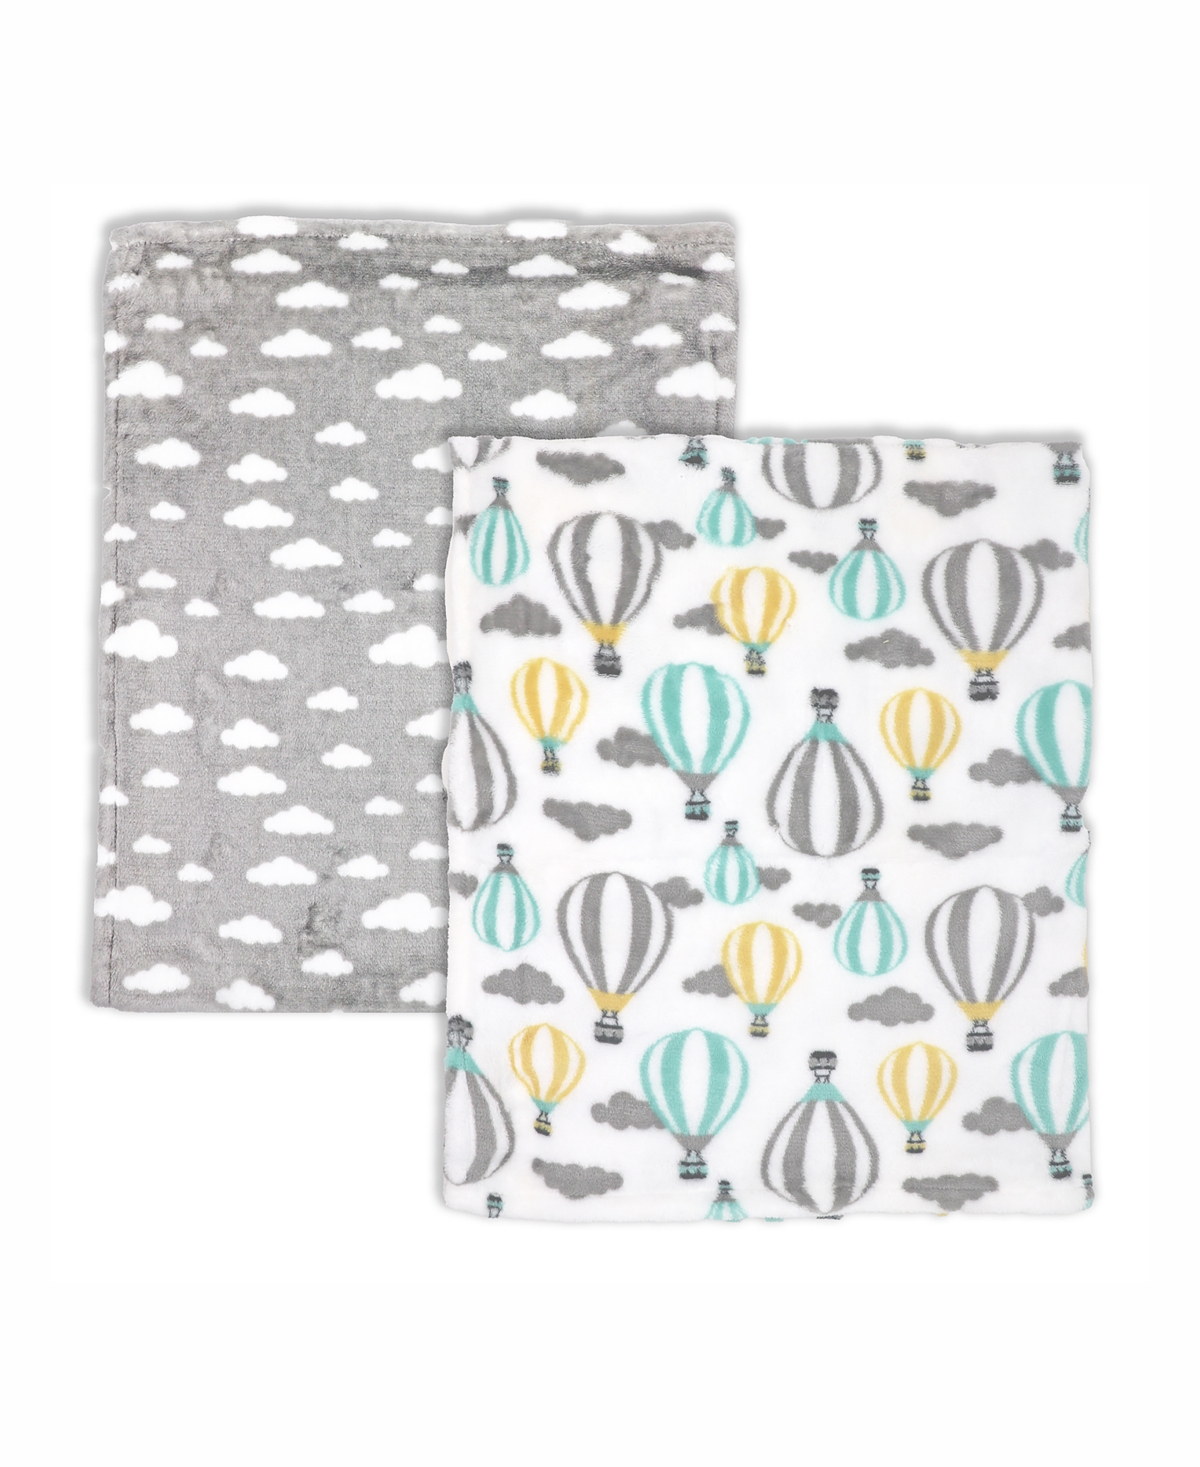 3 Stories Trading Baby Boys And Girls Cozy Flannel Blankets, Pack Of 2 In Seafoam And Gray